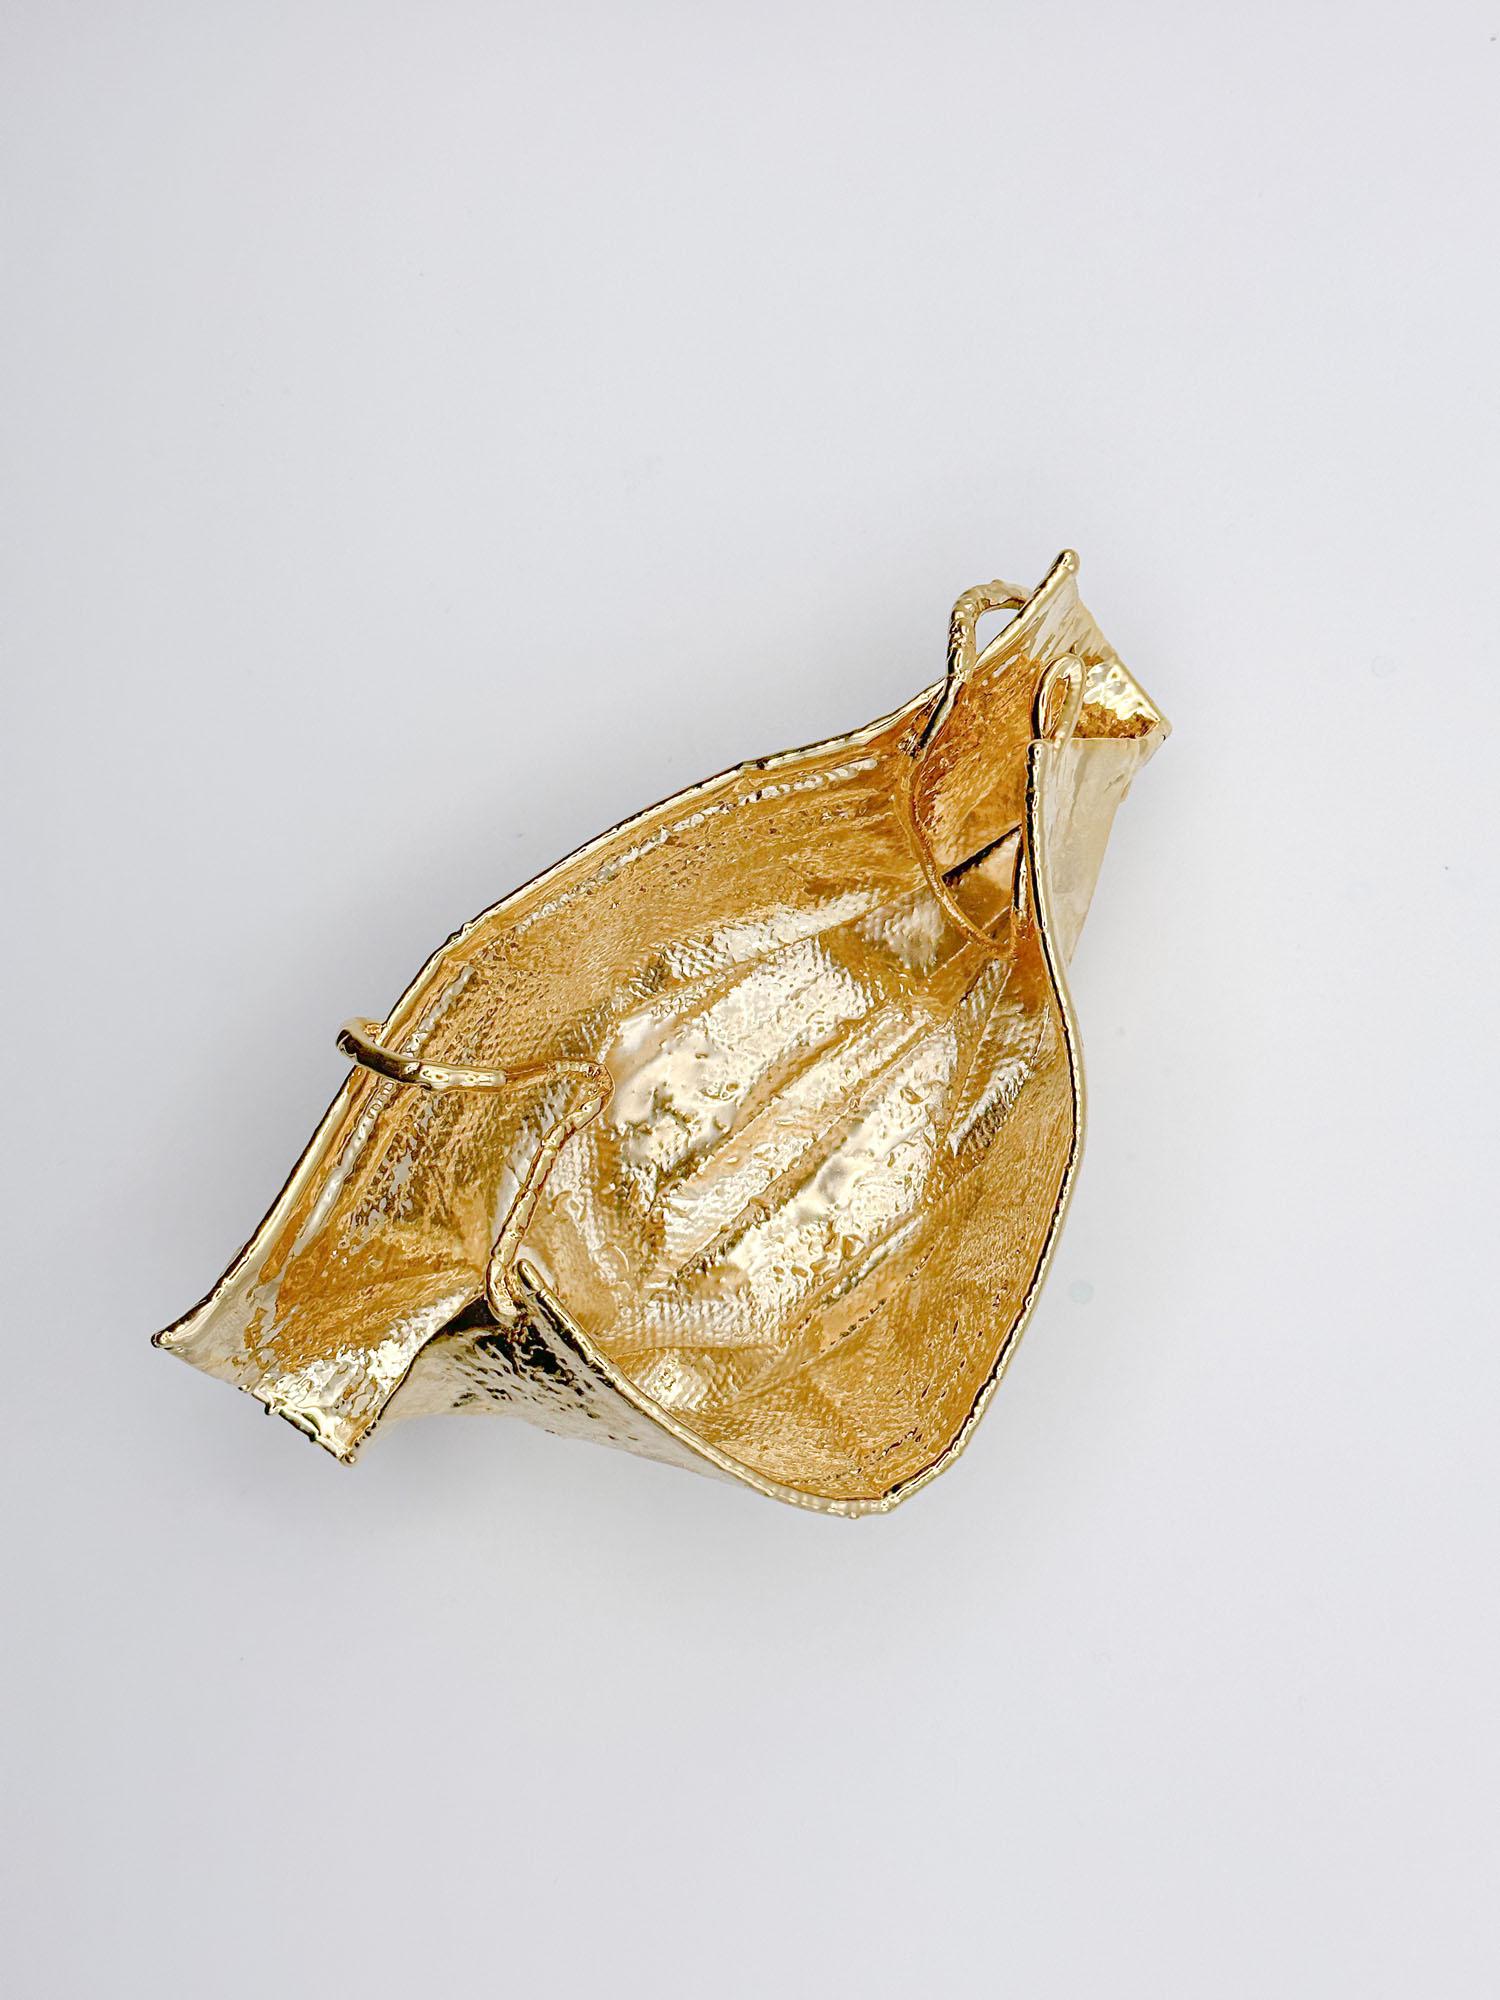 Contemporary Remask Act 001 Gold Art Object Made from Surgical Mask by Enrico Girotti For Sale